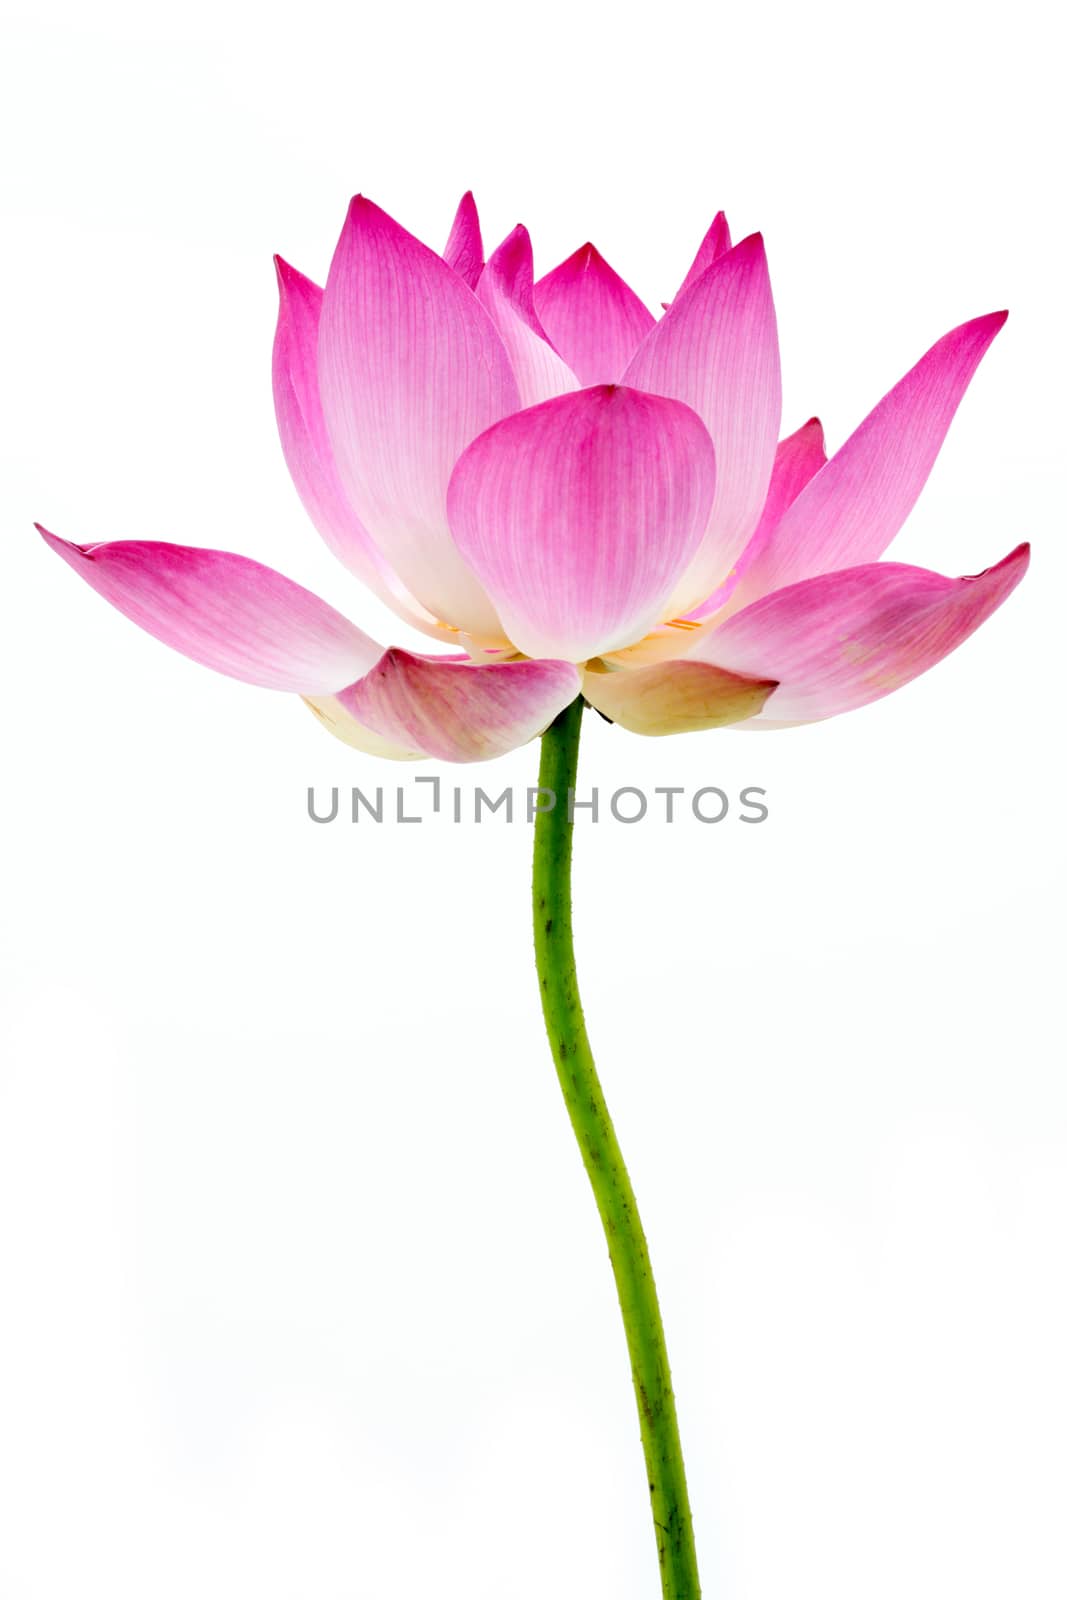 Blooming lotus flower on isolate white background. by Noppharat_th